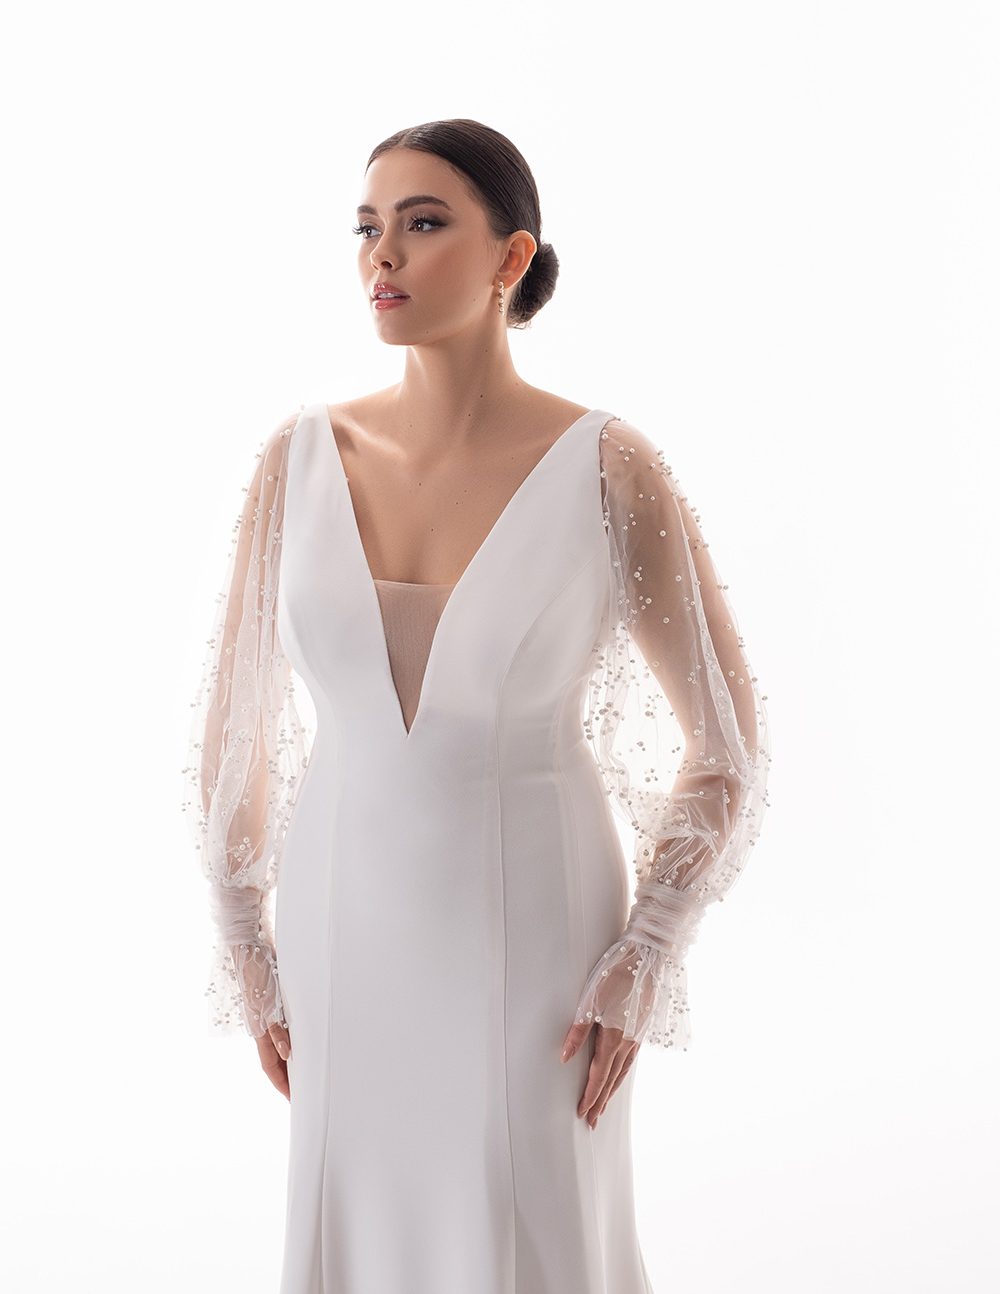 Allegra-with-Pearl-Sleeves